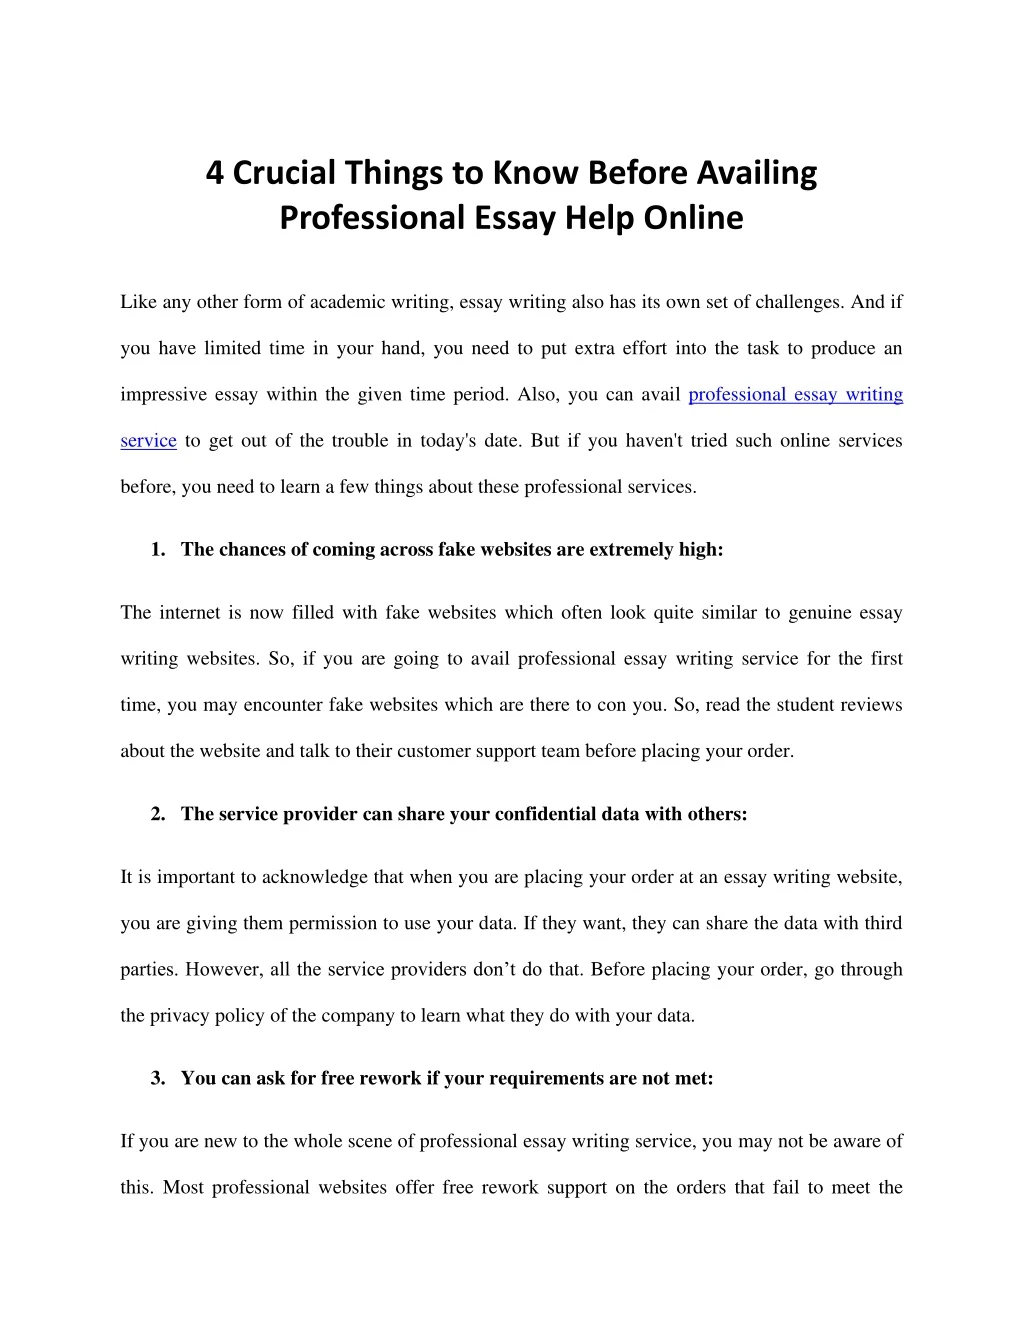 4 crucial things to know before availing